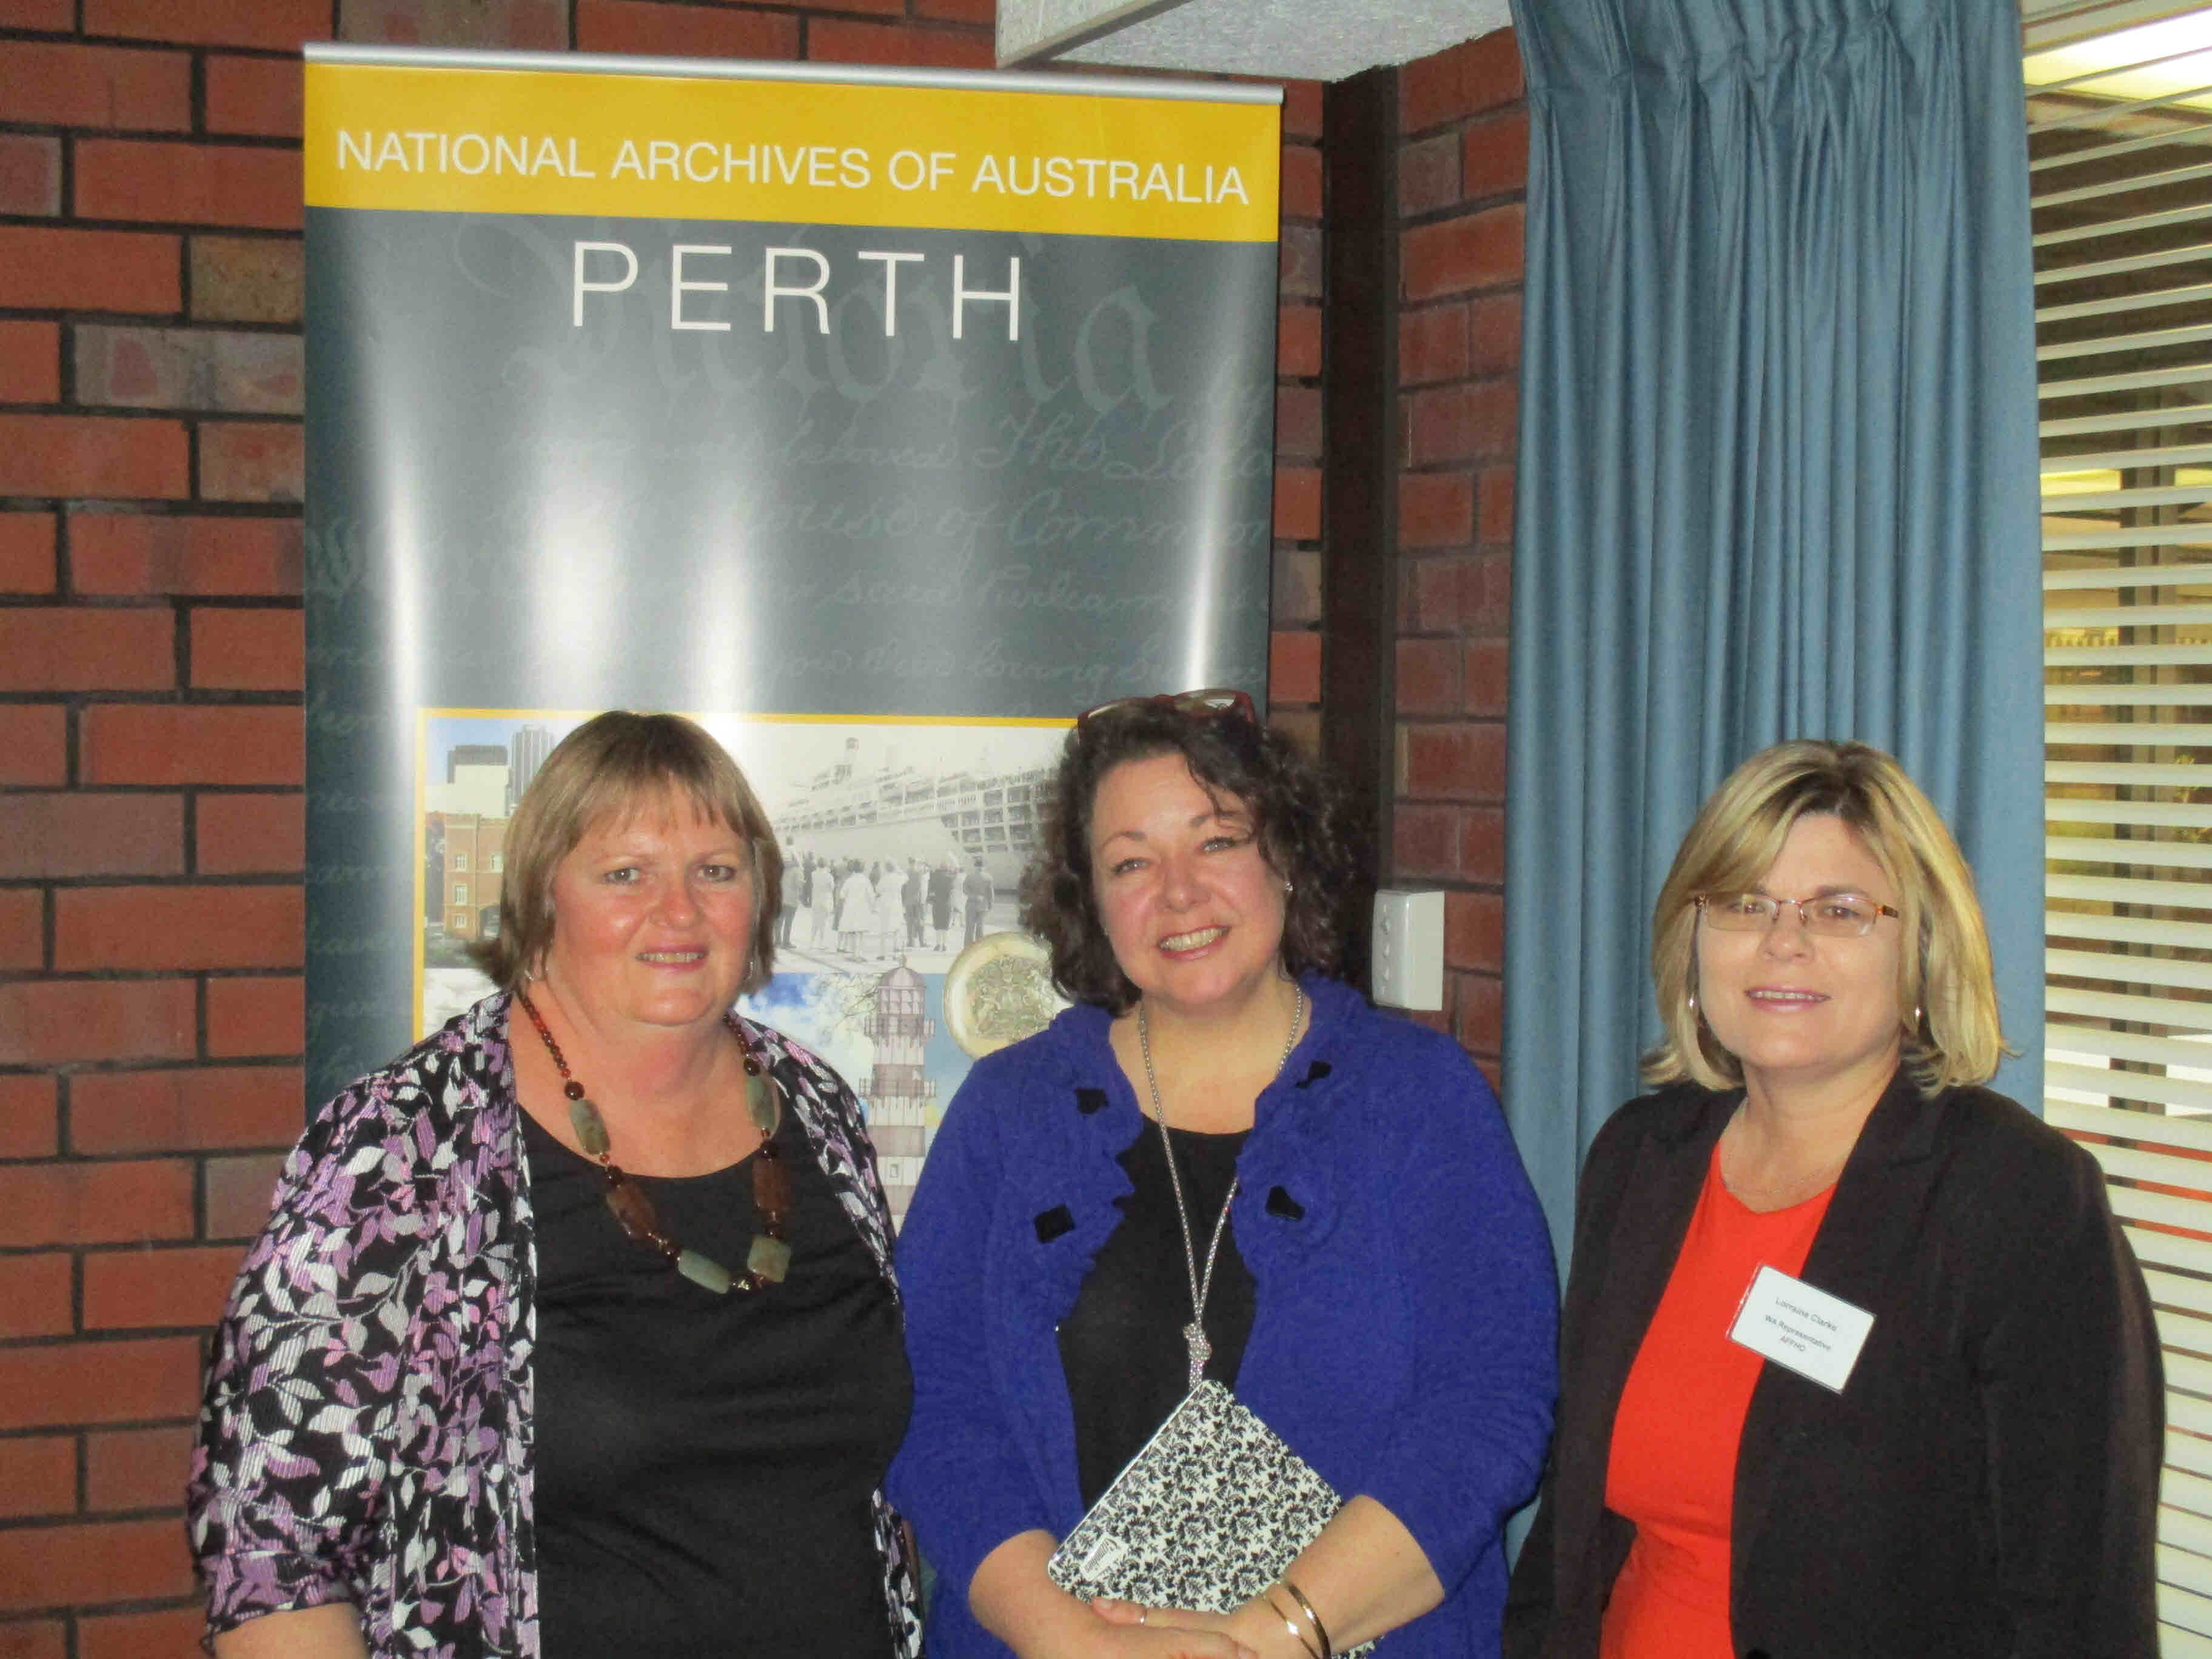 Launch of National Family History Month 2016 & Making History Seminar in Perth